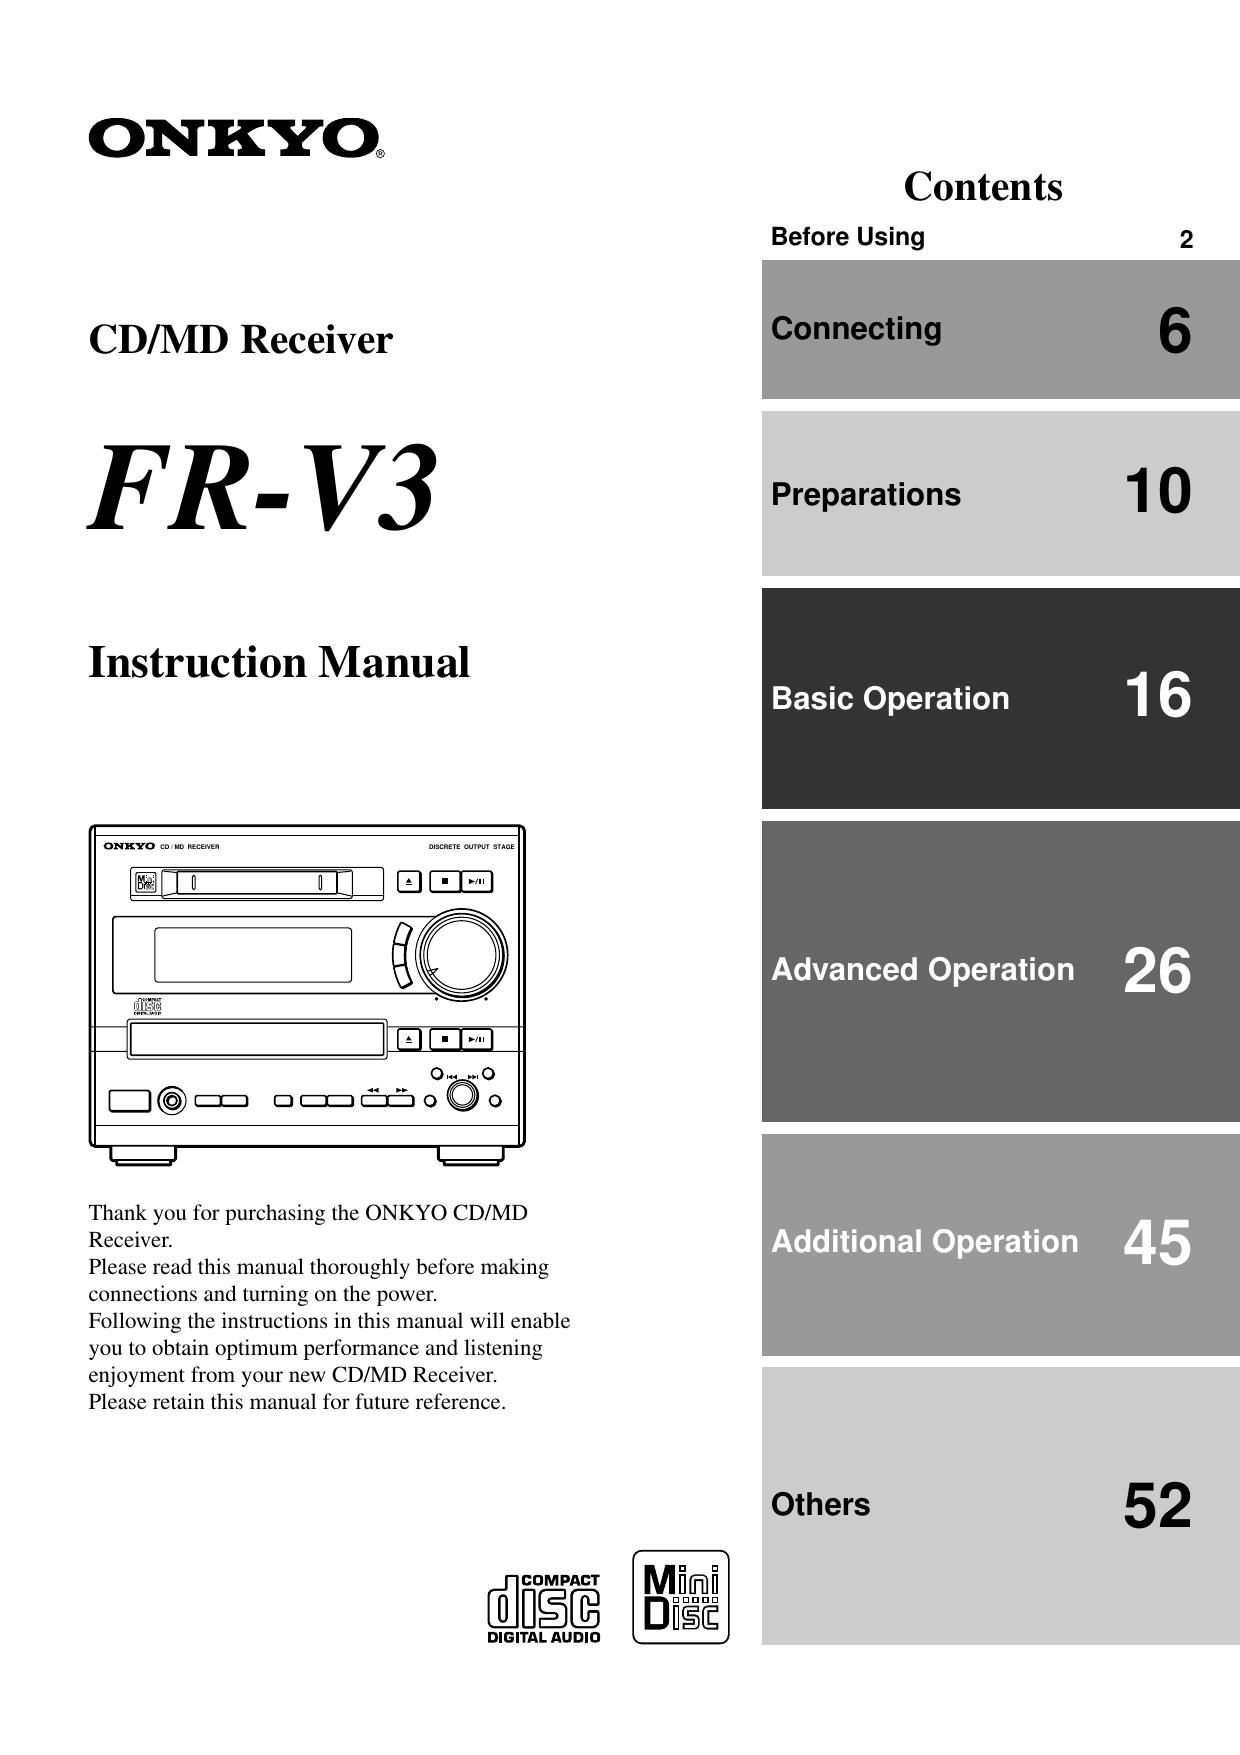 Onkyo FRV 3 Owners Manual 2